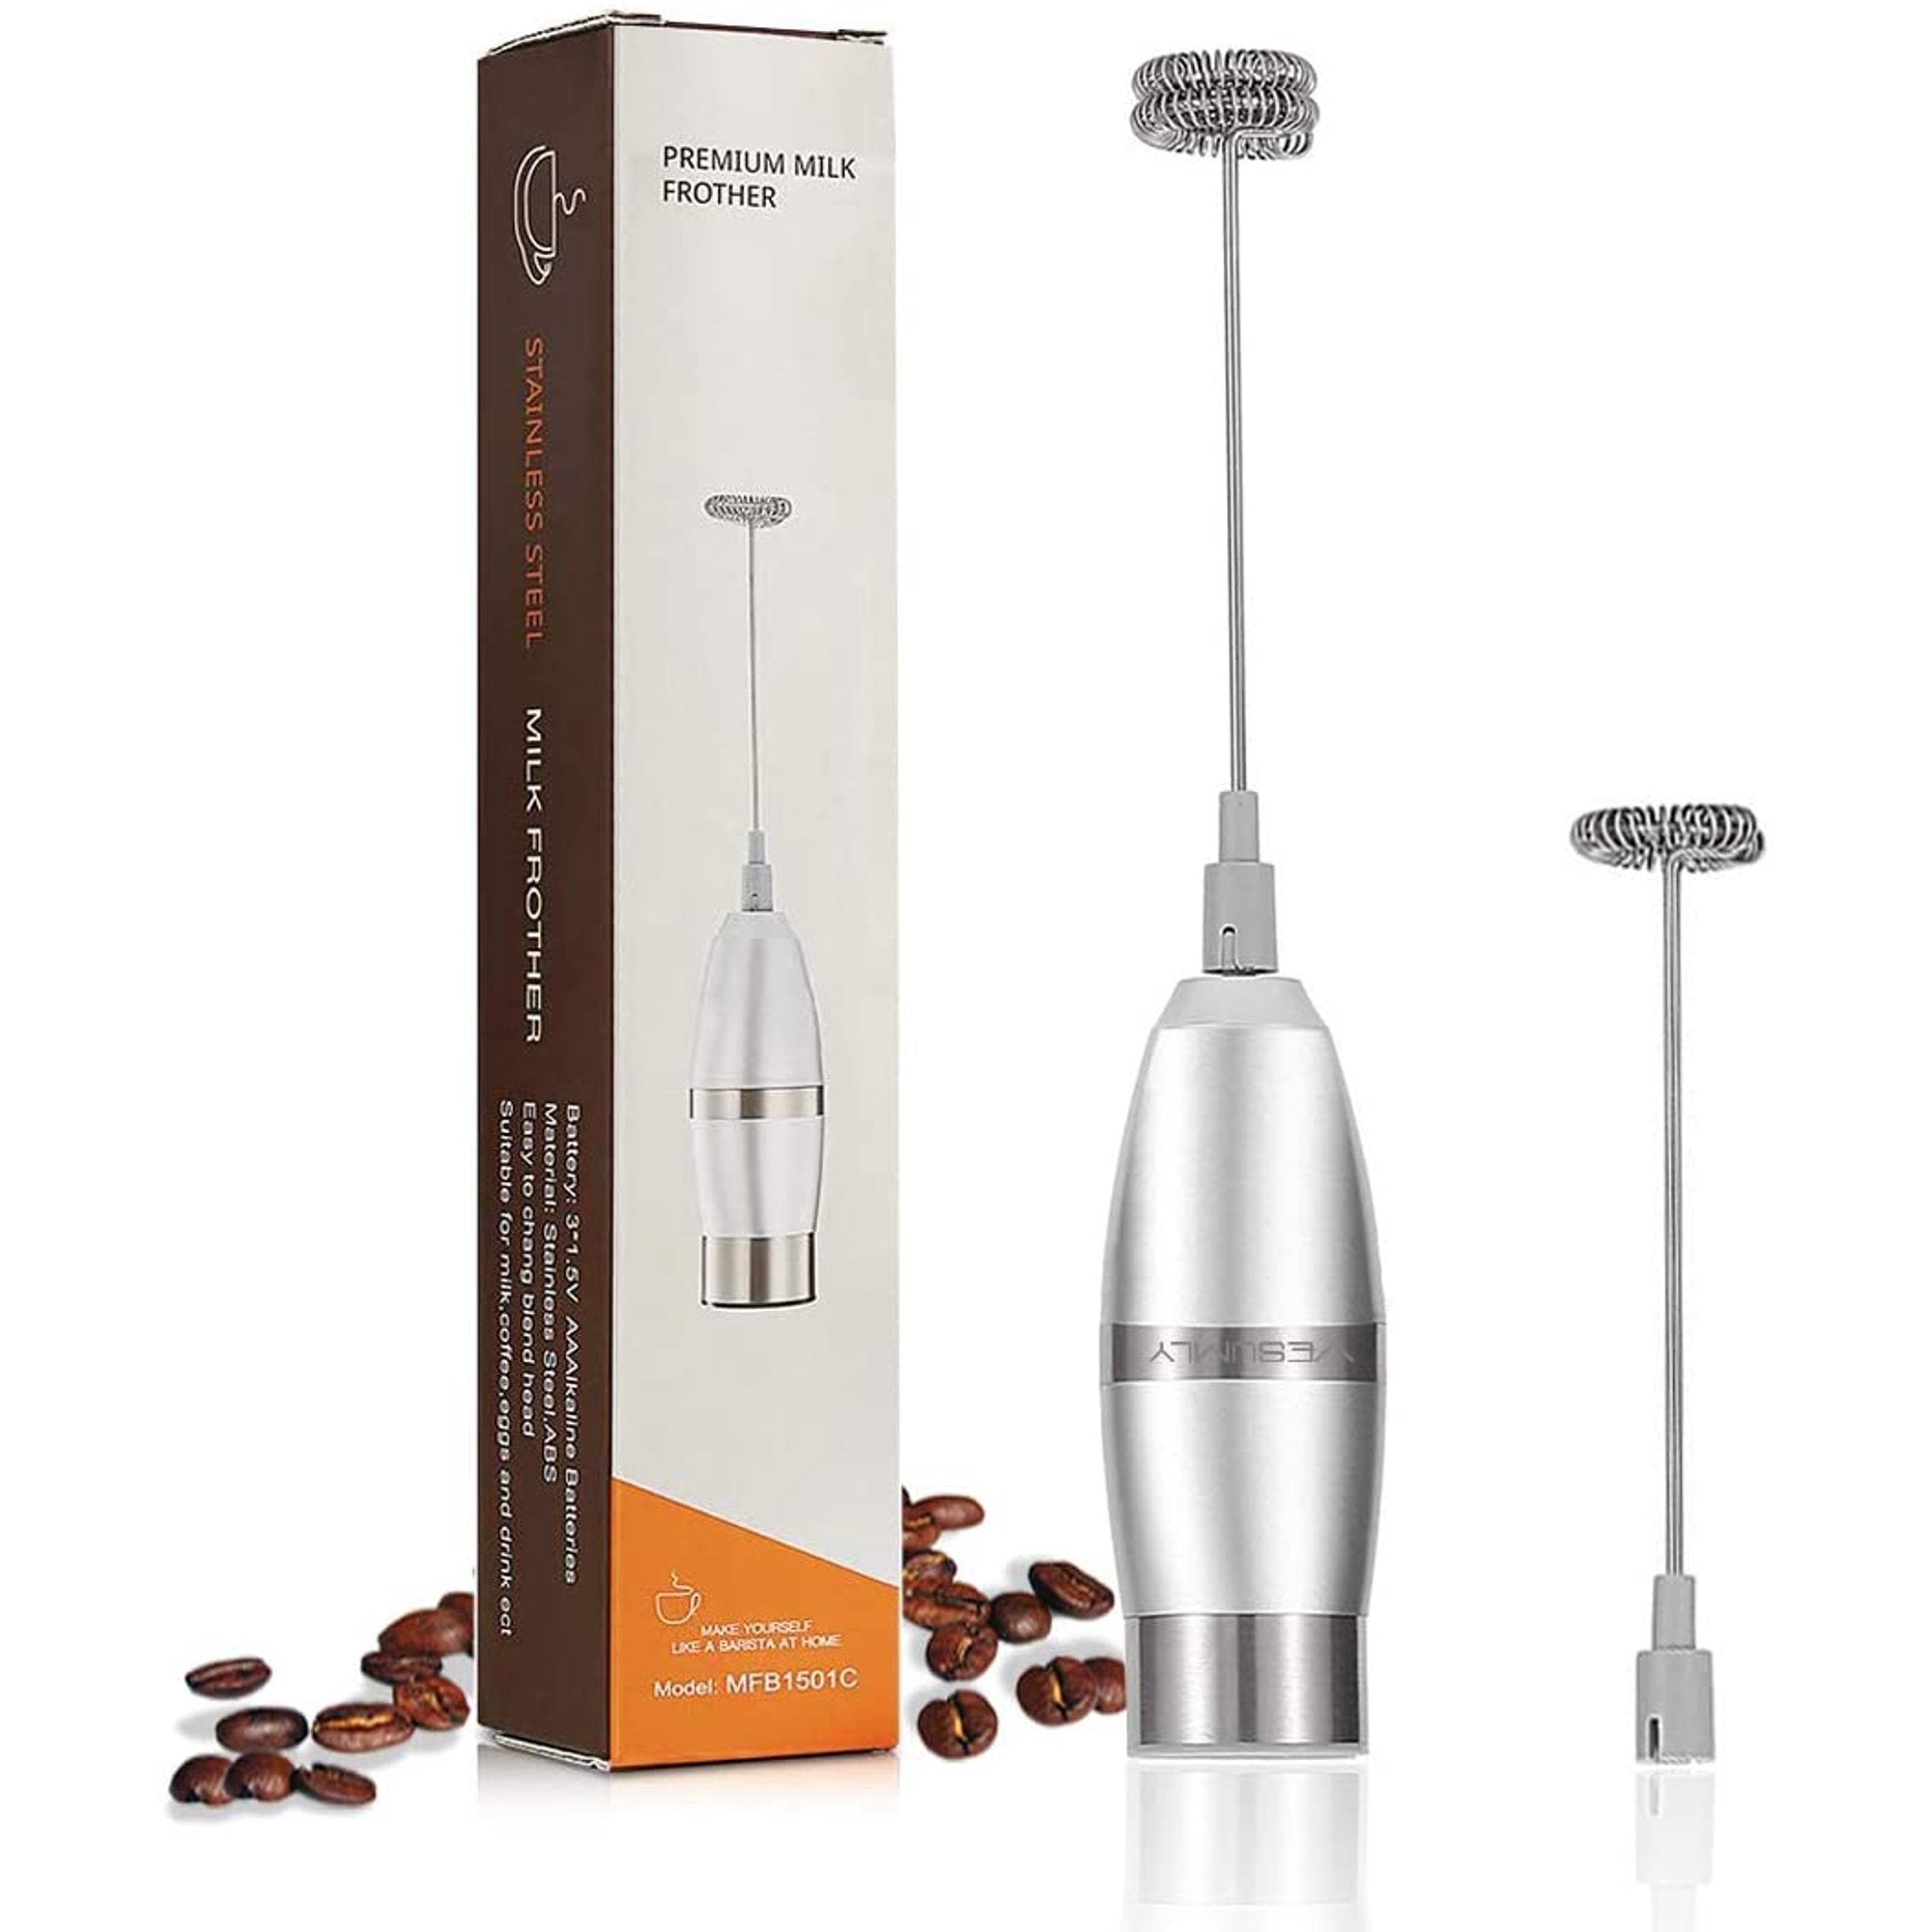 Super Fast Handheld Milk Frother, ProFroth Upgrated Motor